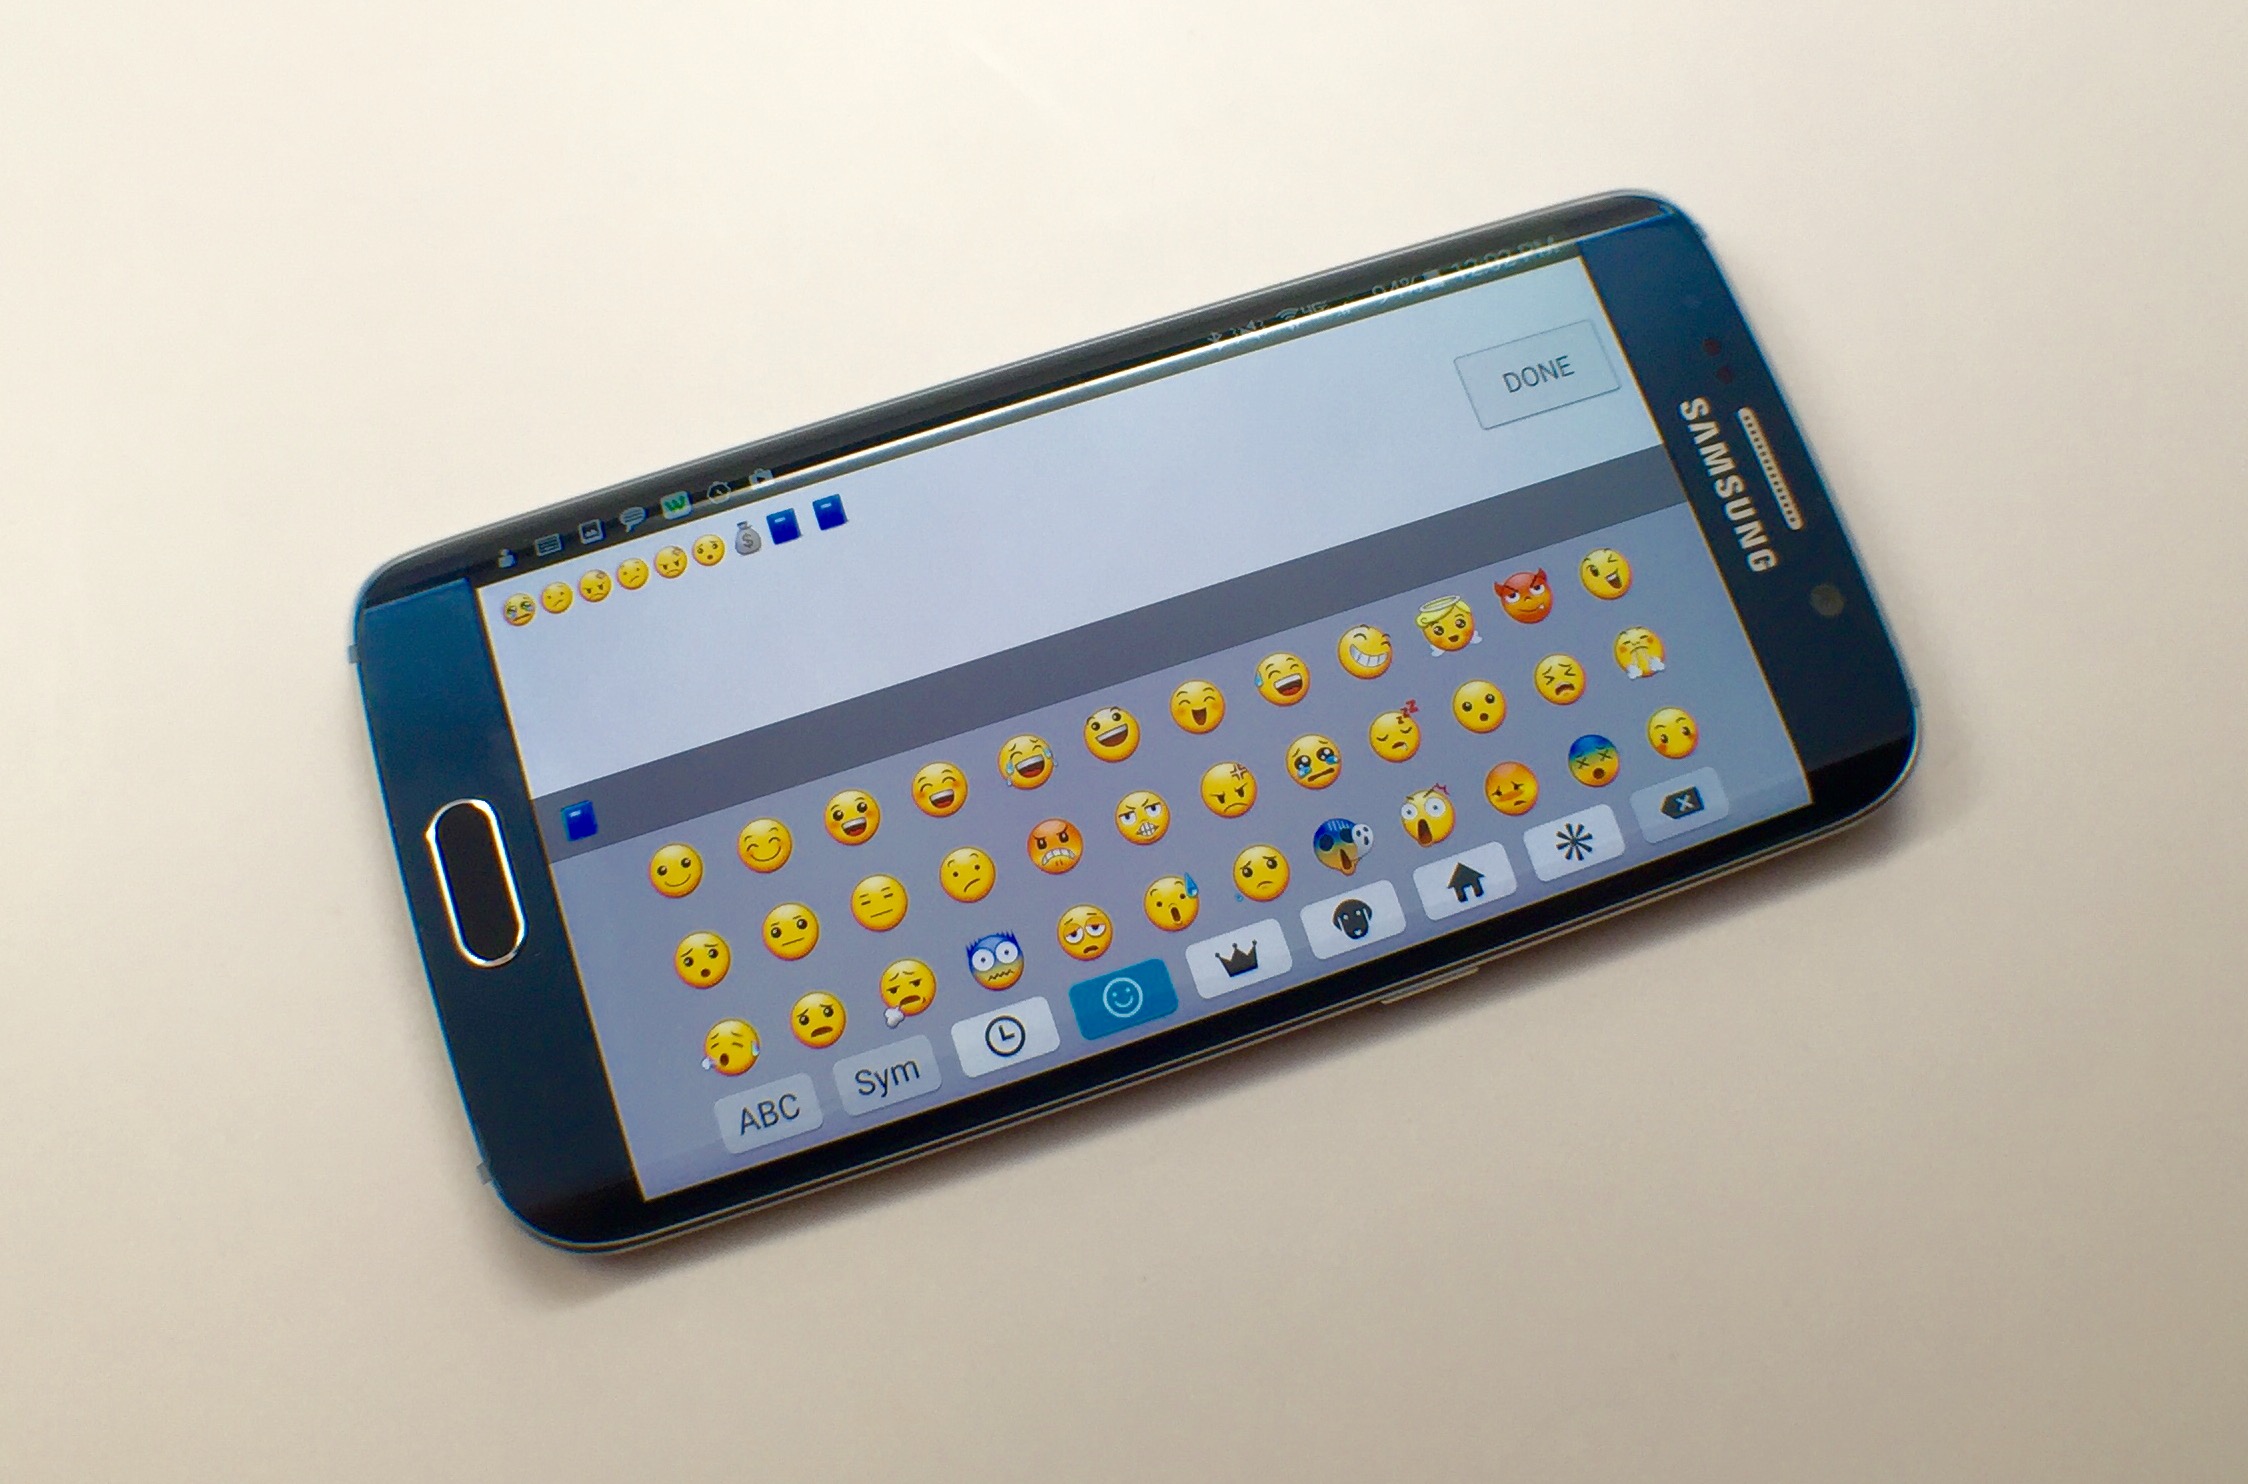 Here's how you can use the Galaxy S6 Edge and Galaxy S6 Emoji keyboard.